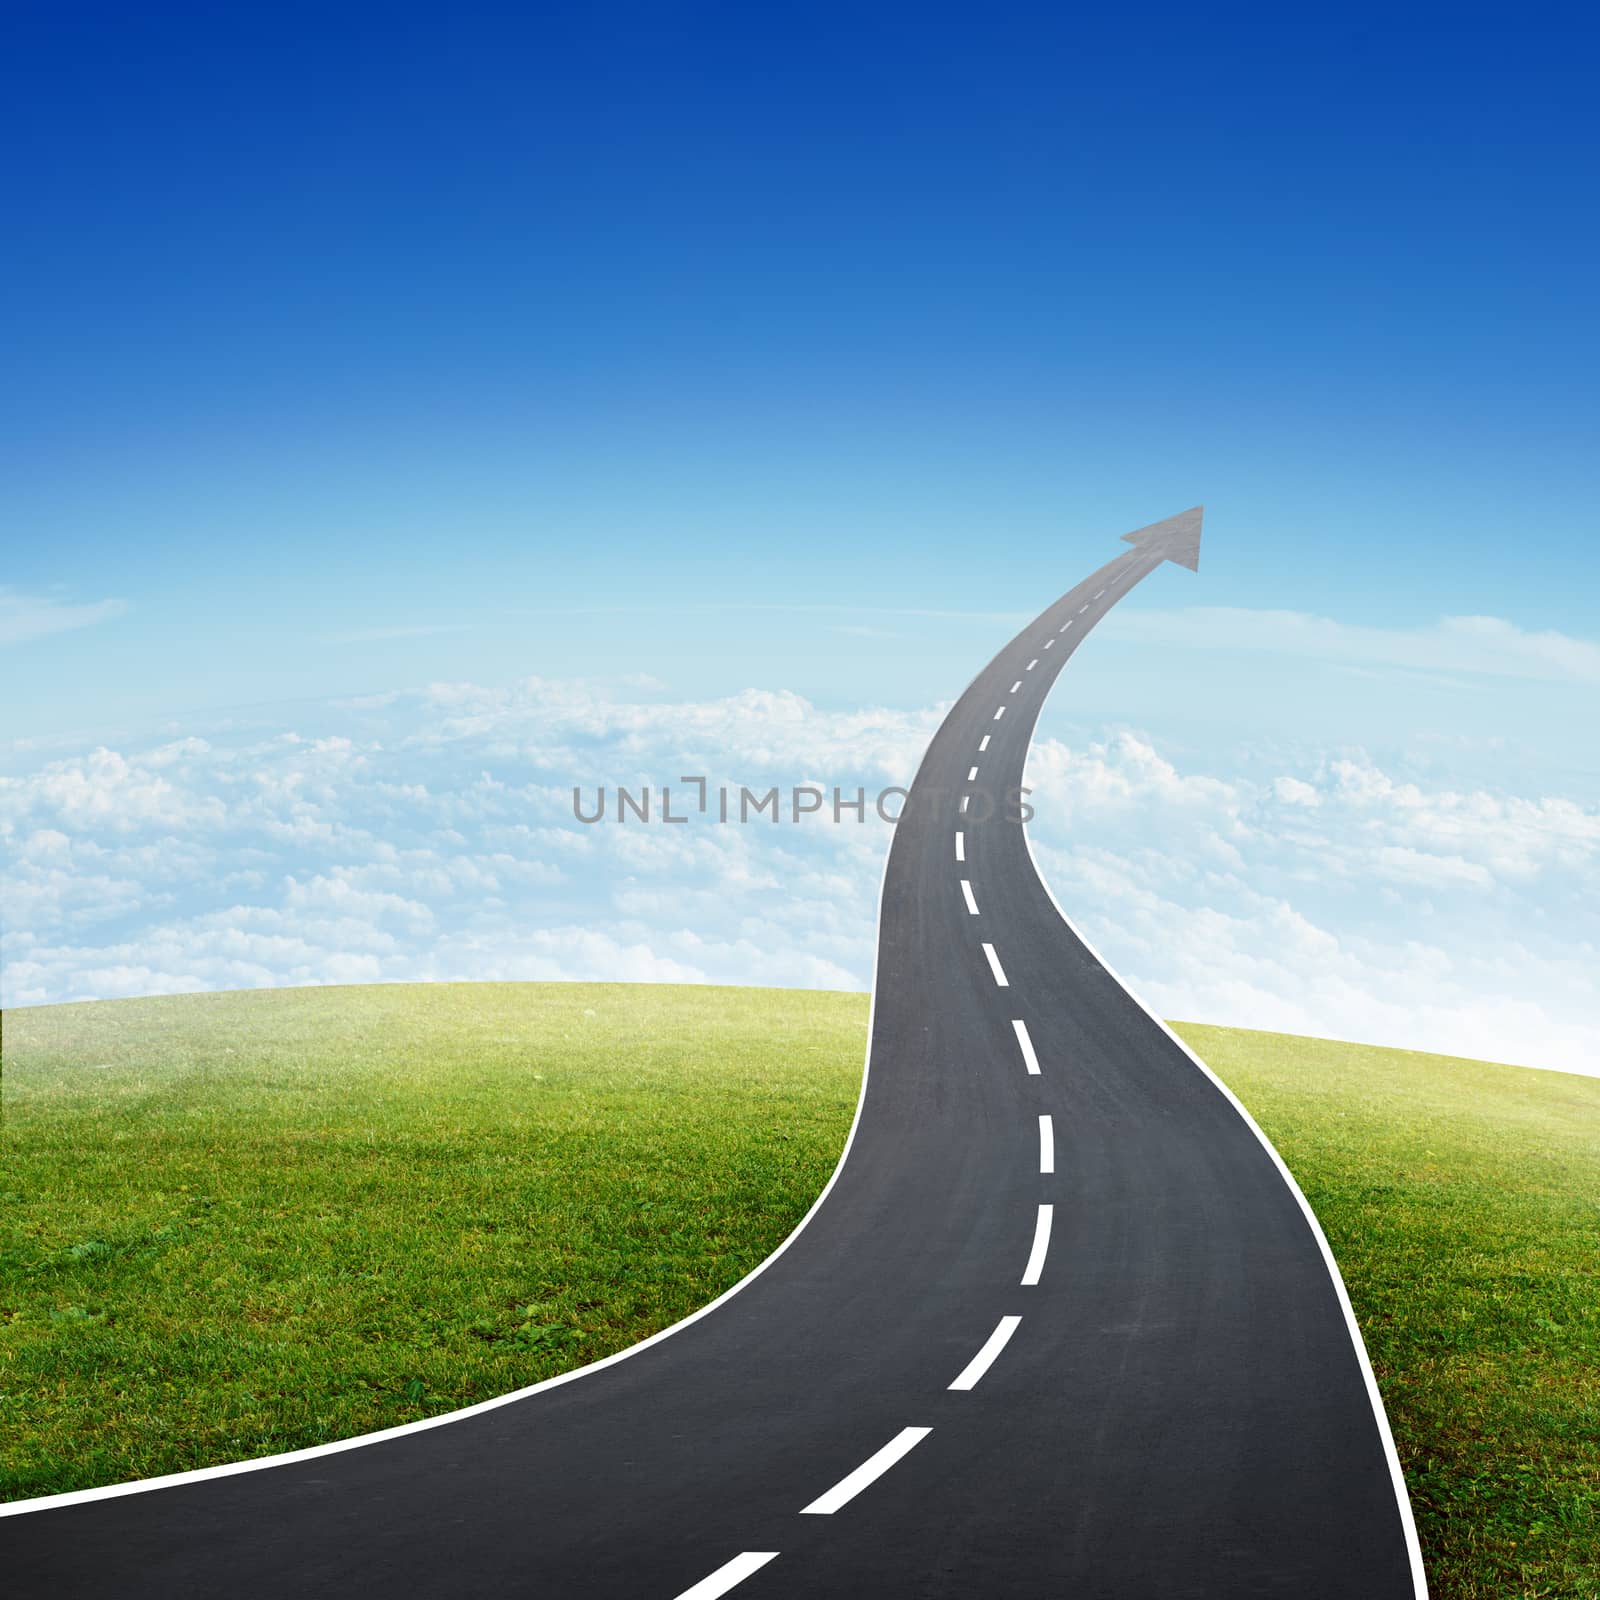 Highway road going up llike arrow in sky with clouds